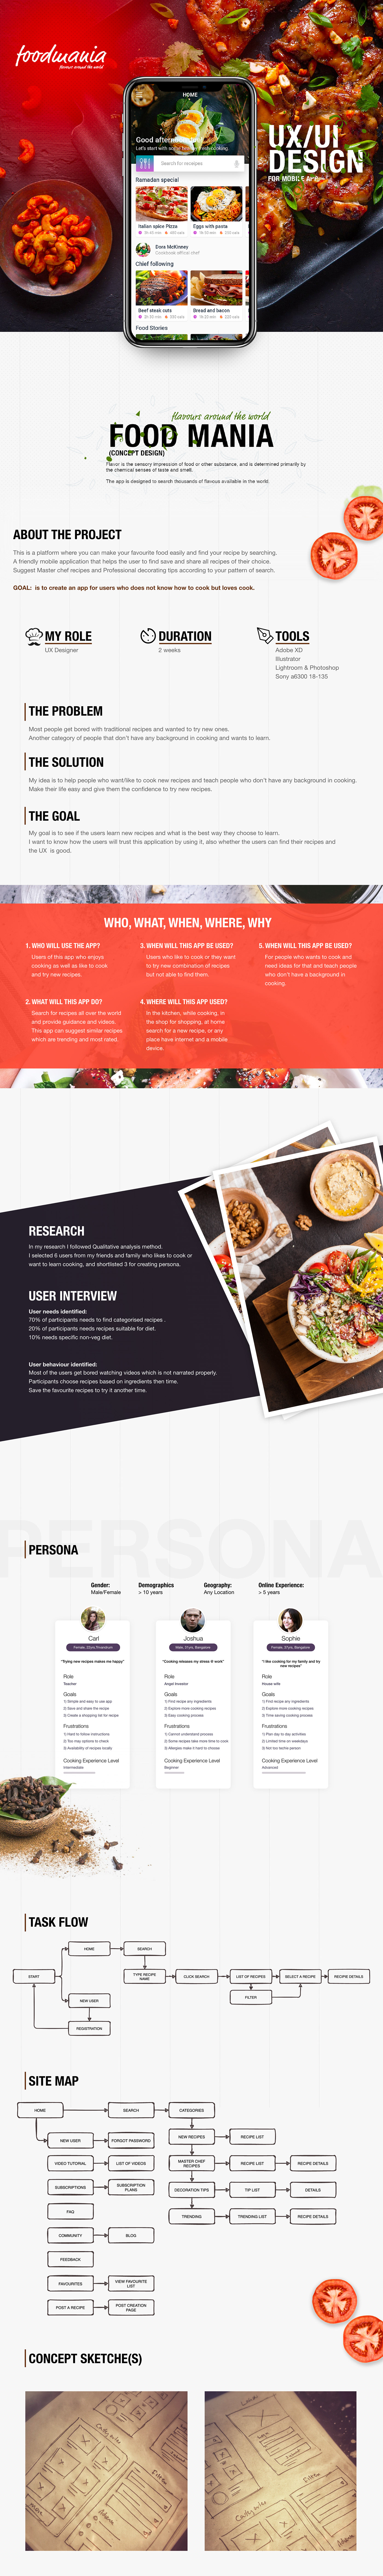 Case Study cooking app information architecture  research UX design